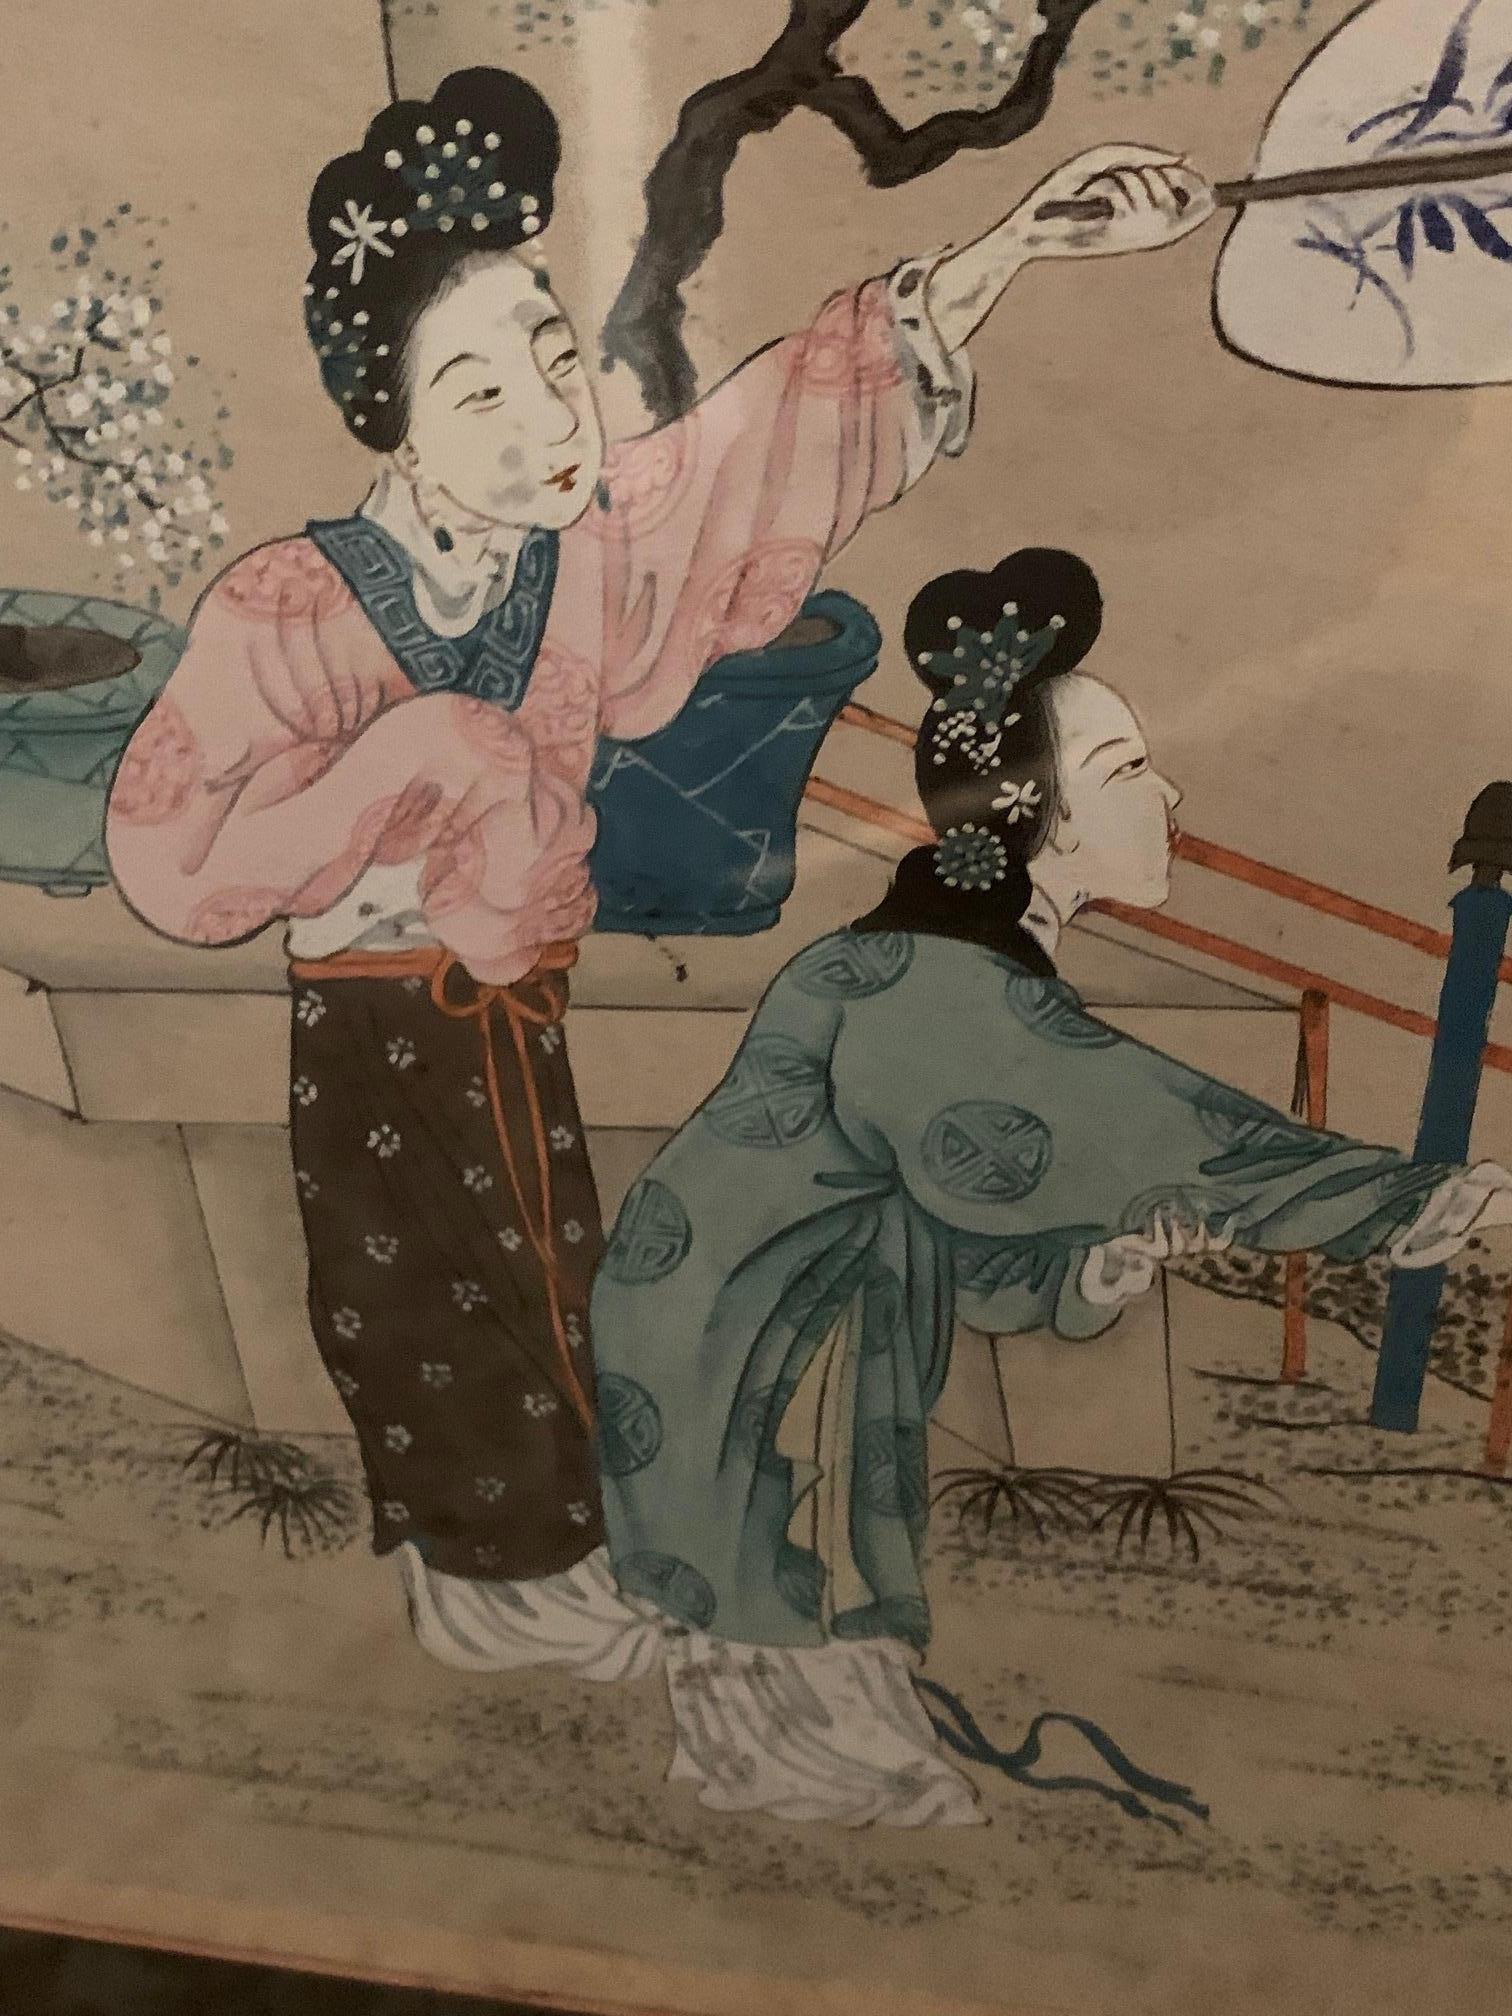 Lovely figural antique Japanese gouache on paper having kimono clad geishas in a garden setting with butterflies and foliage. Beautifully framed with dark mat and faux bamboo gilded frame.